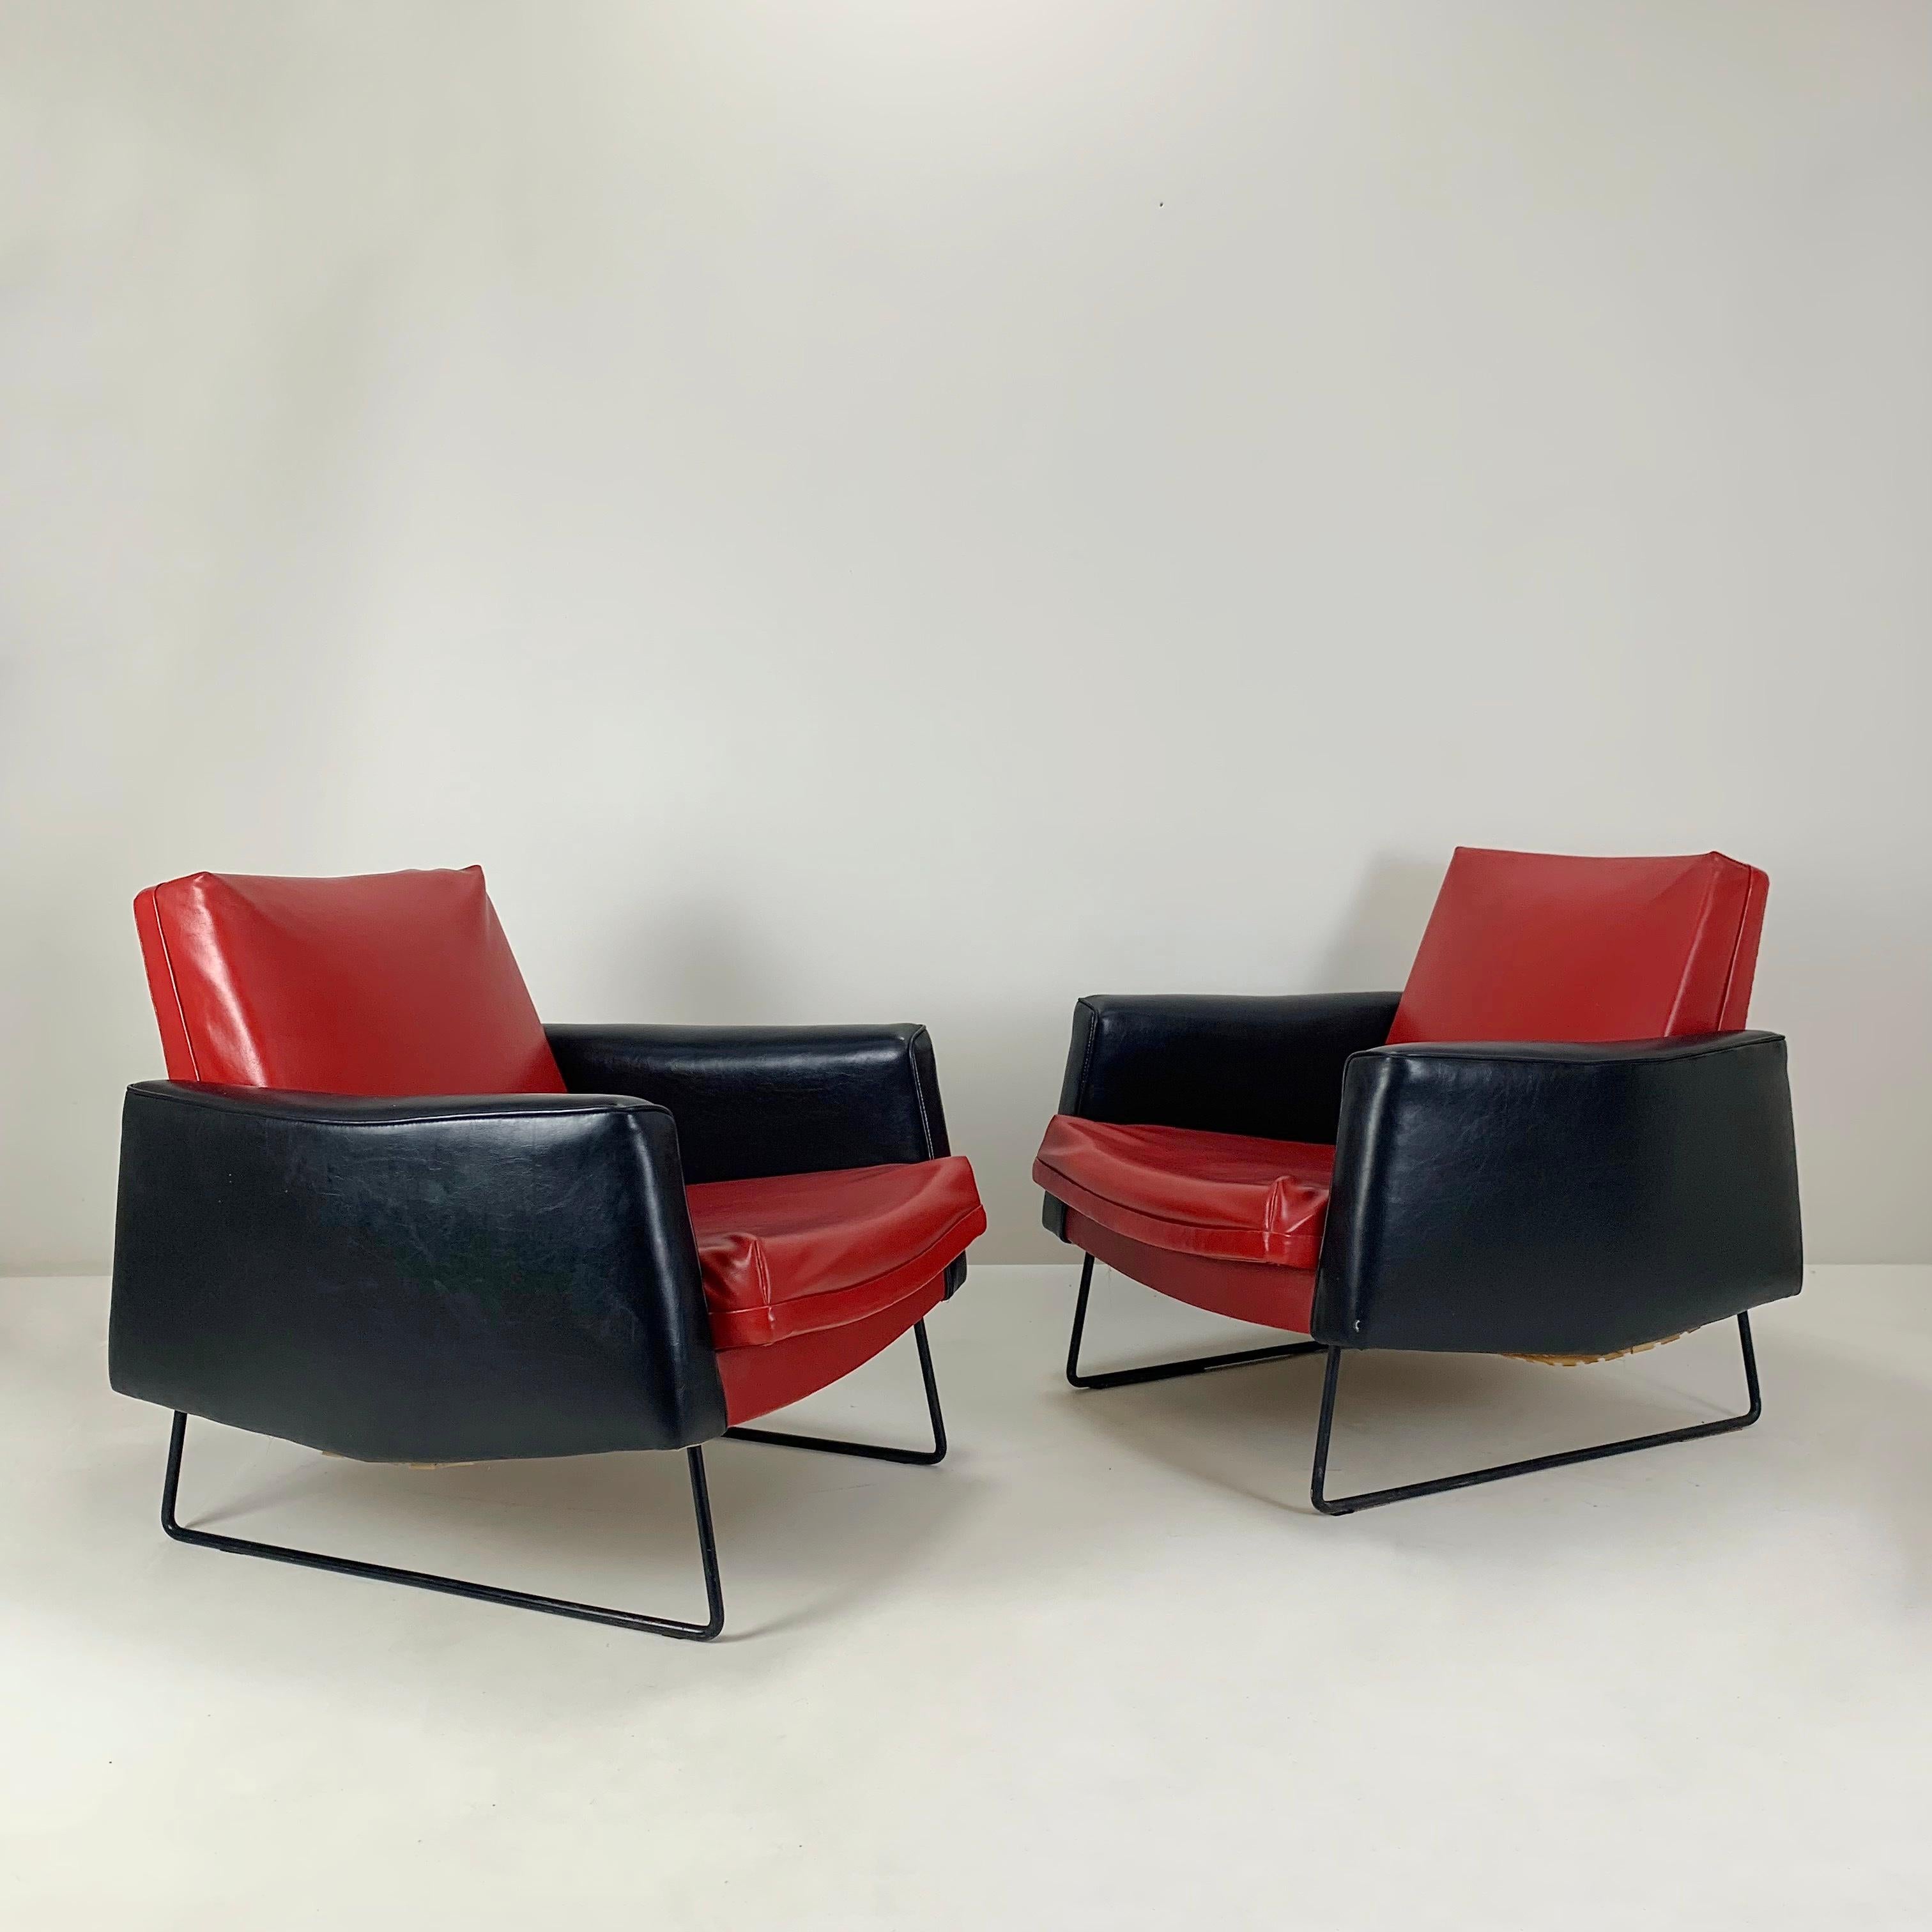 Nice pair of armchair by Louis Paolozzi for Zol edition, circa 1958, France
Prélude model, foam, original black and red faux leather, black metal feet.
Edition: 74 cm W, 72 cm H, 80 cm D, seat height: 40 cm.
Original vintage condition, unrestored.